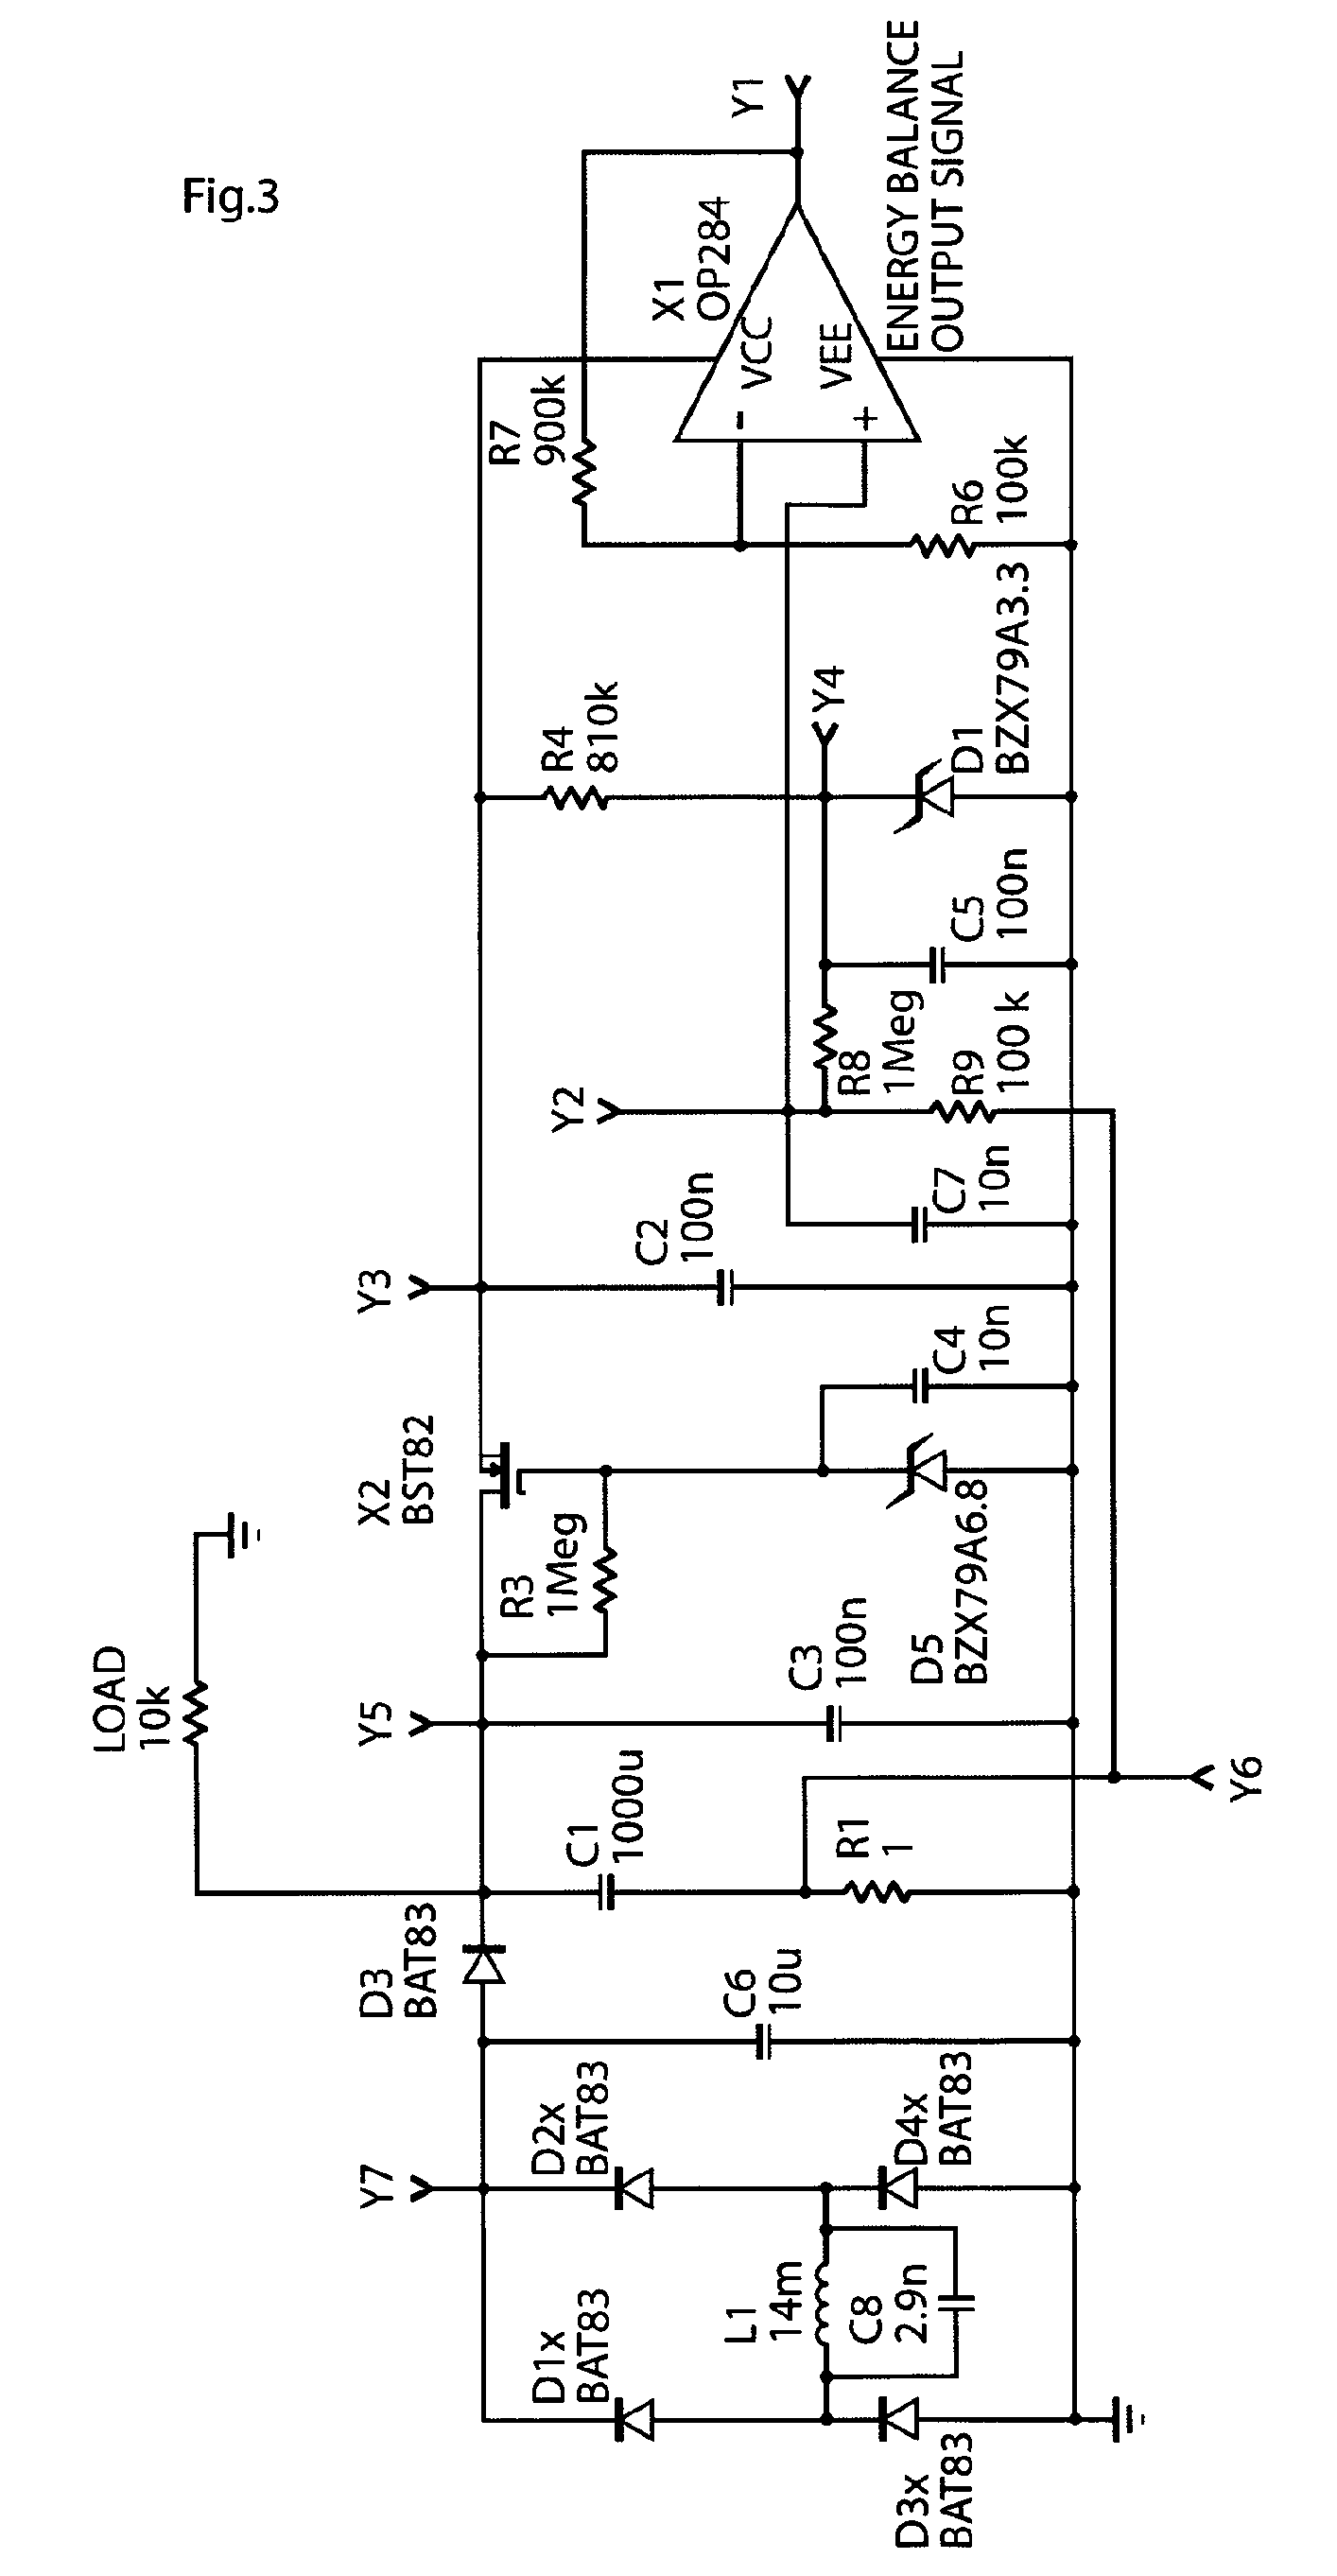 Method and apparatus for supplying energy to a medical device